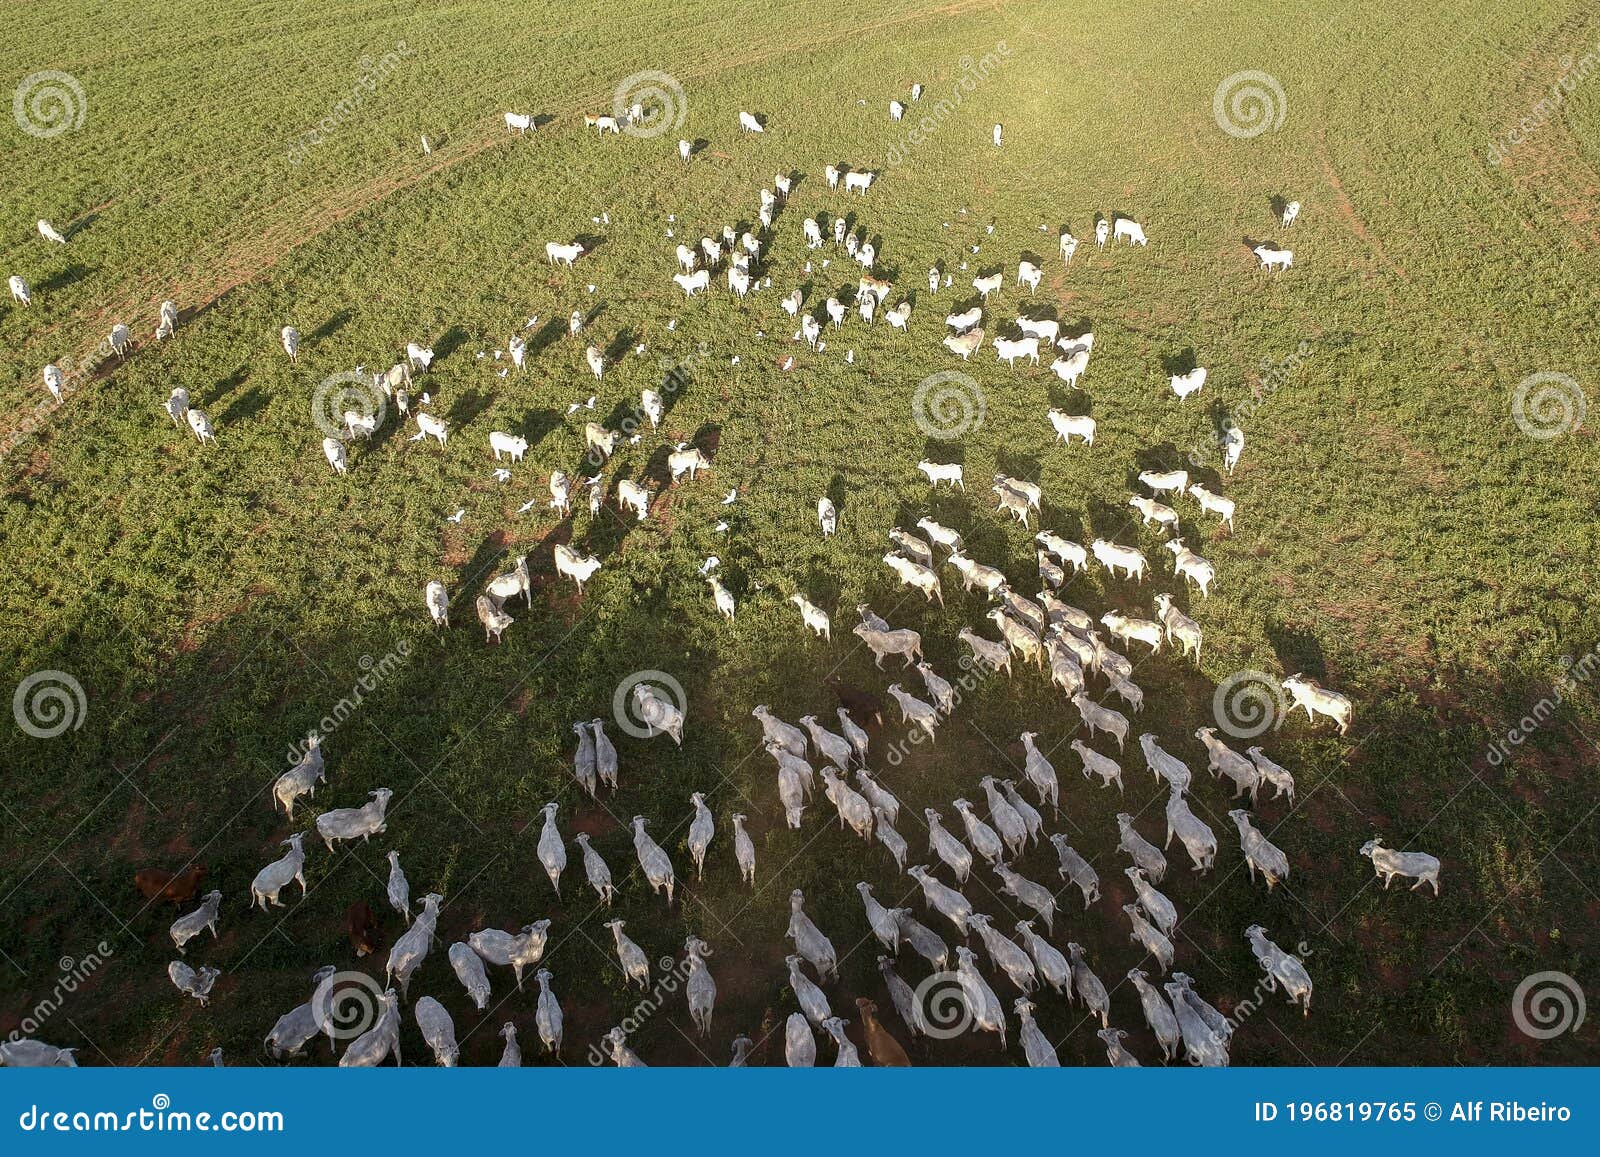 aerial view of nelore cattle on pasture